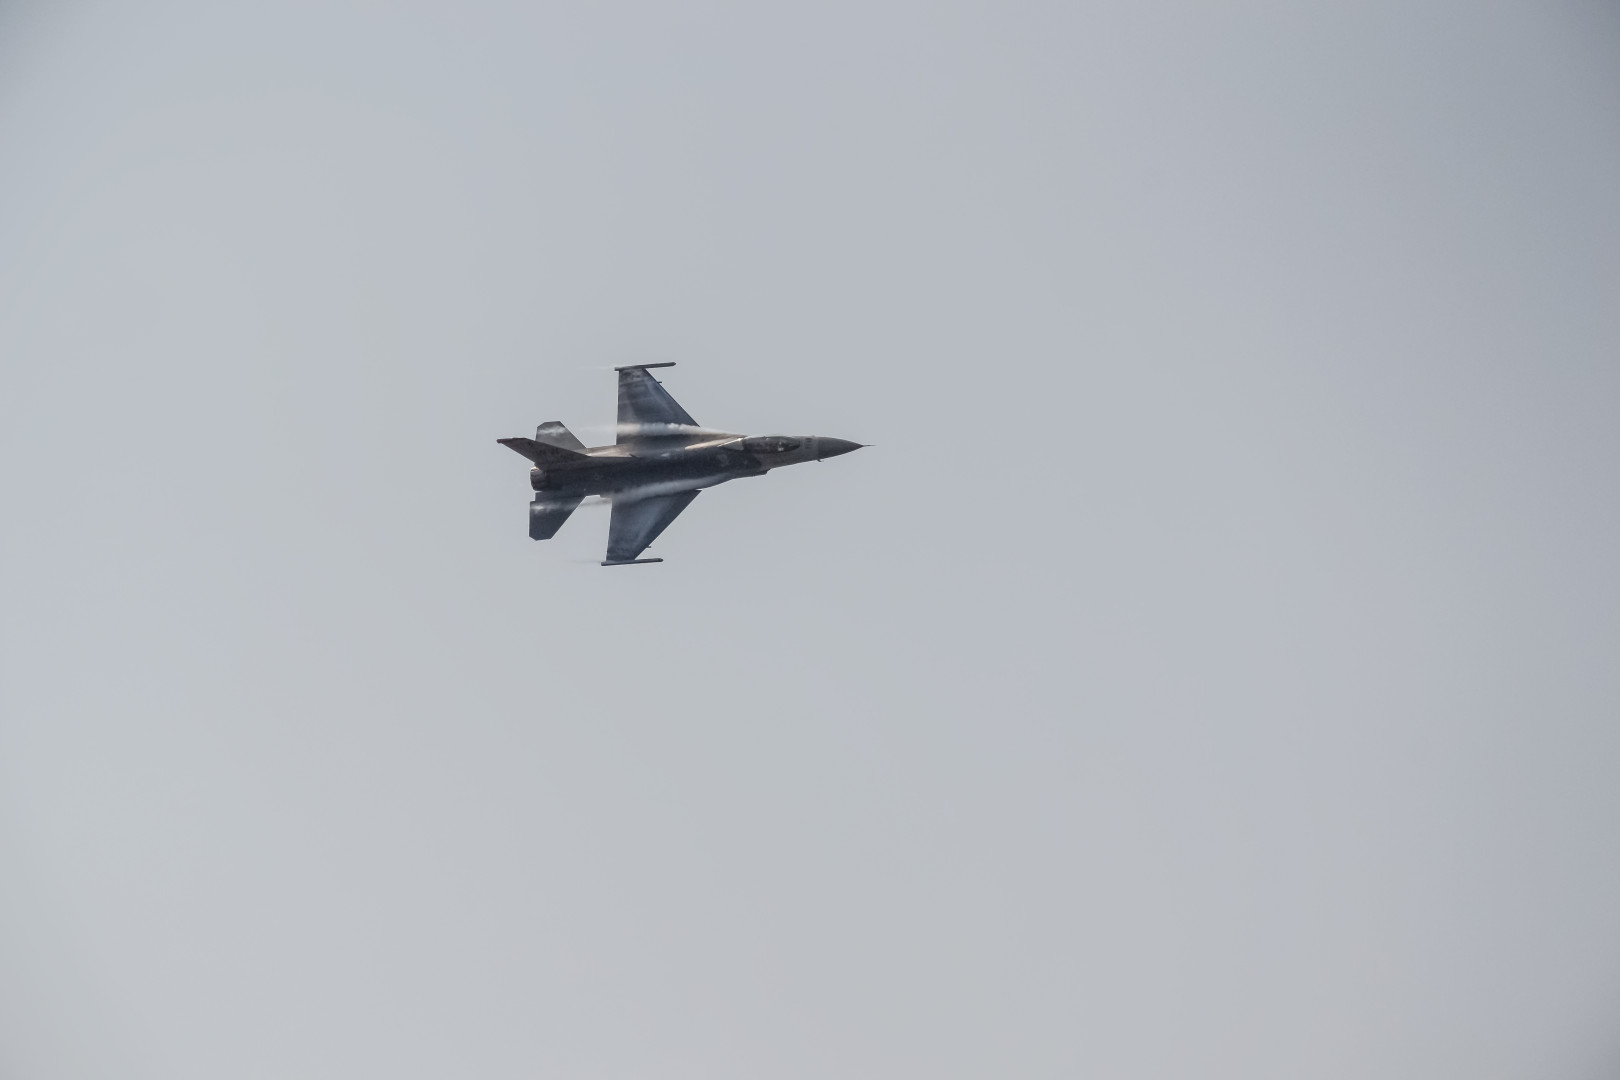 Pacific Air Force Solo Display Team's F-16CJ was the first to perform. Photo from LIMA'15 as I missed out the aerial display.